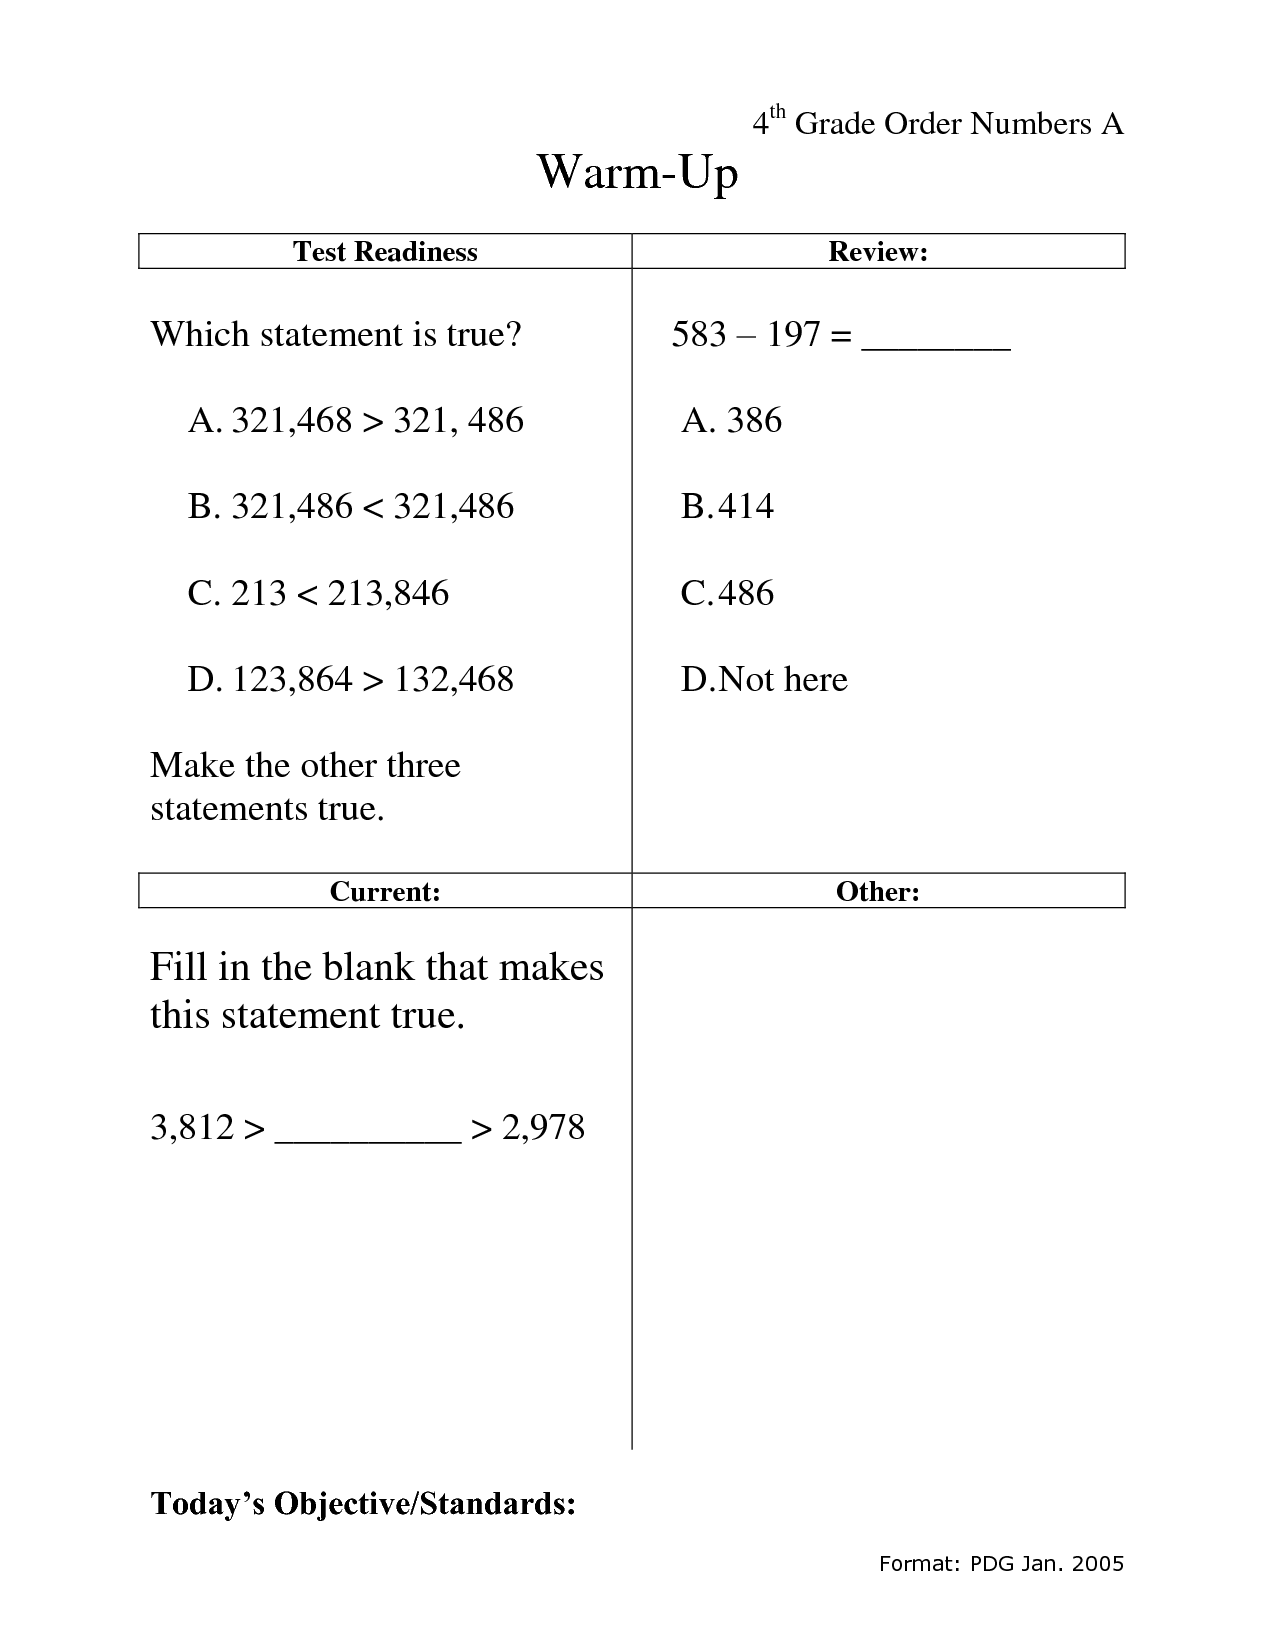 Comparing and Ordering Decimals Worksheets 4th Grade Image